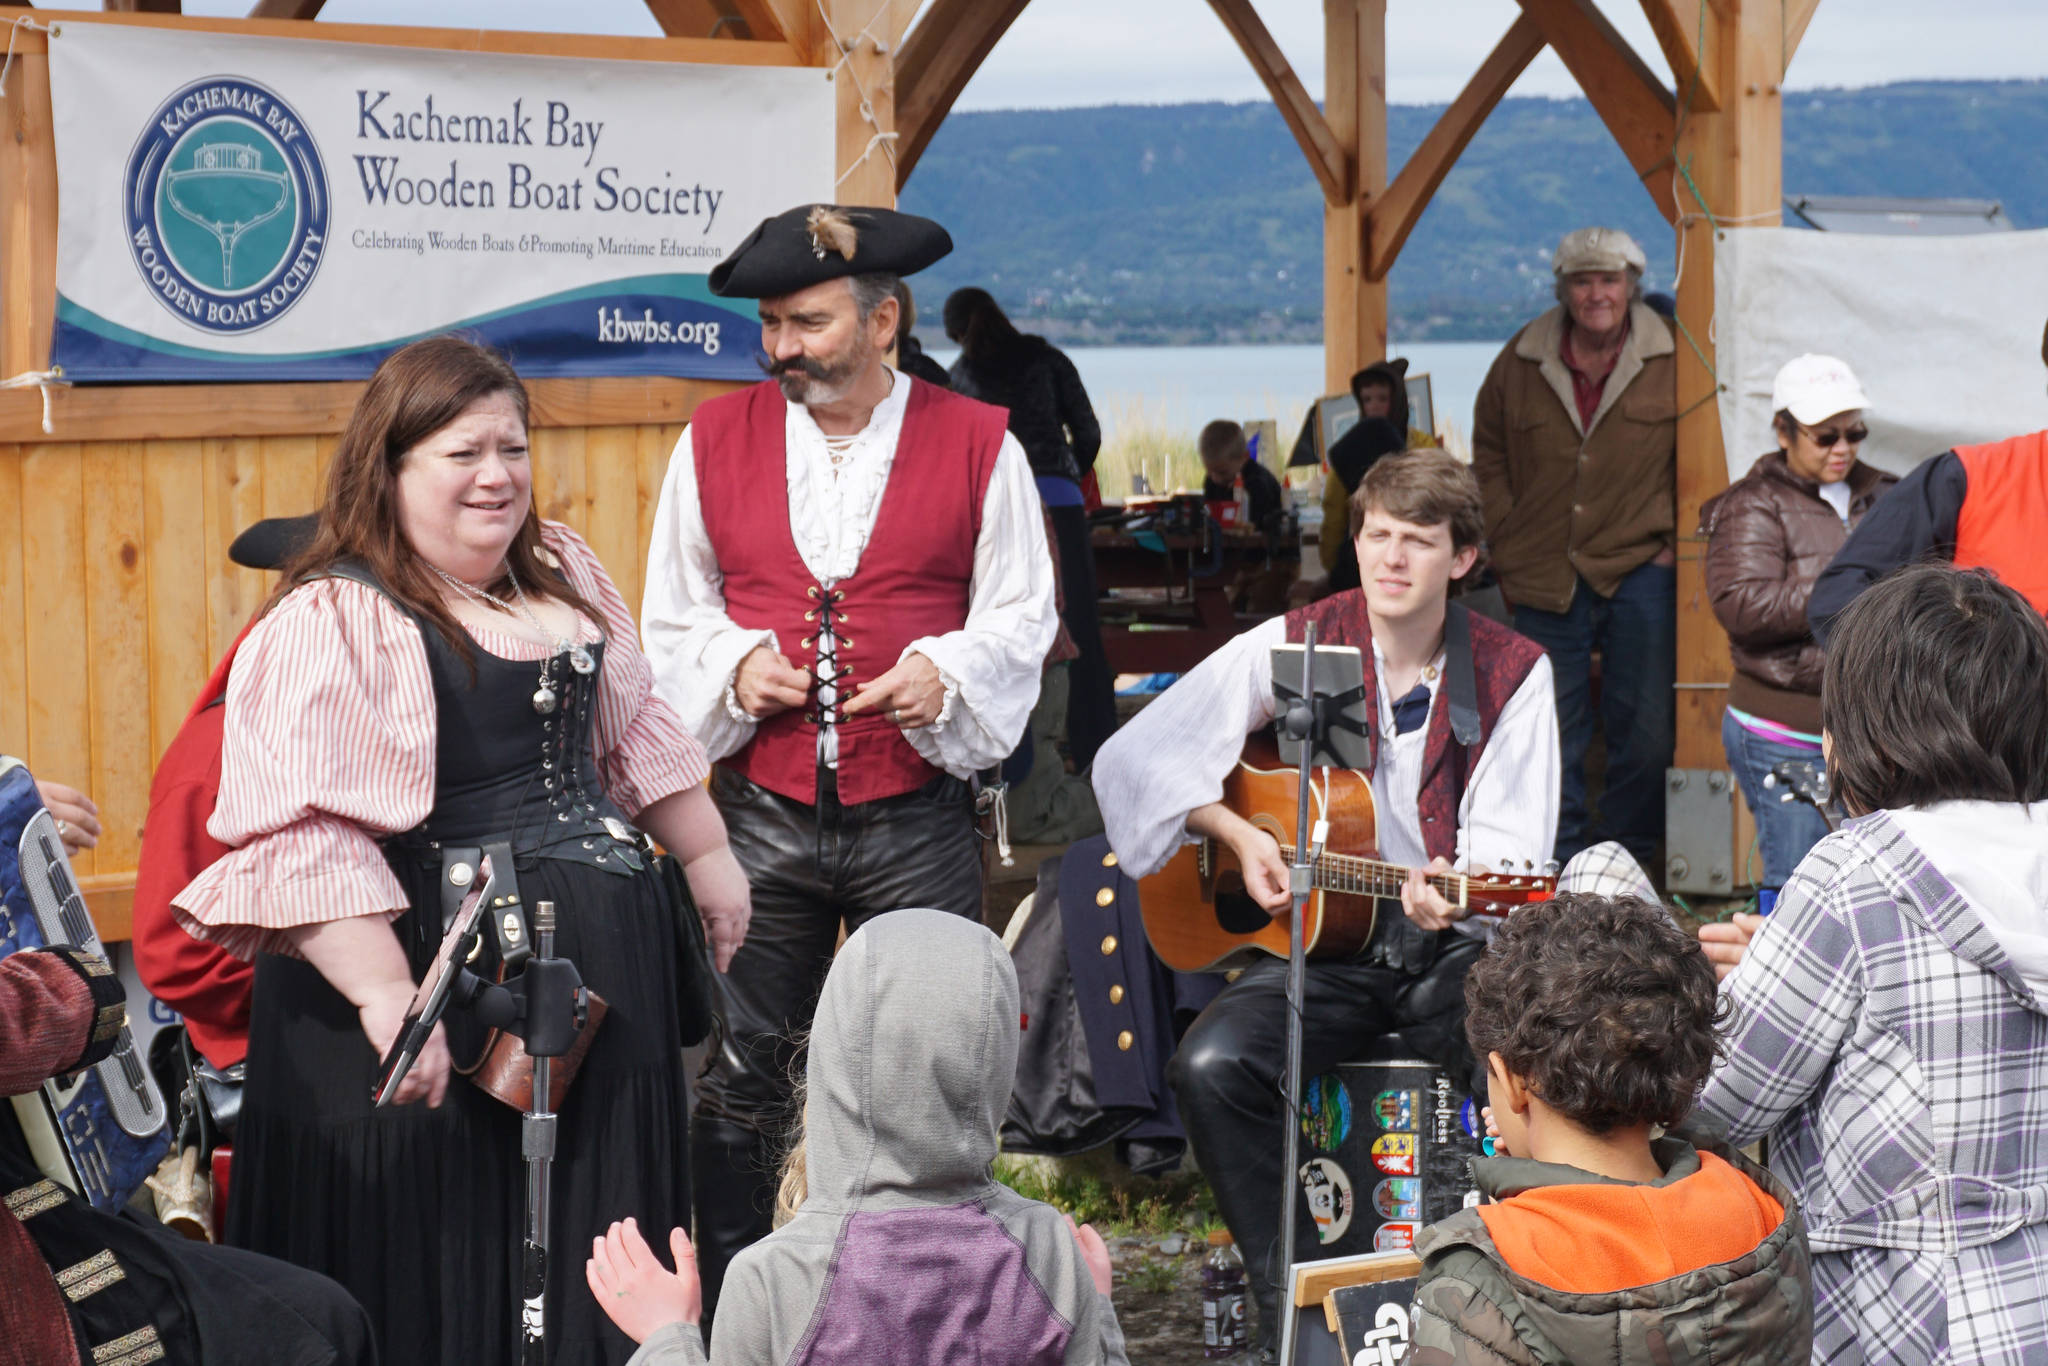 Erin Searcy-Dudgeon Wells of Rogues & Wenches, center, leads a sing along at the Kachemak Bay Wooden Boat Society Festival on Saturday at the Nick Dudiak Fishing Lagoon campground. At left are Lucia Woofter and Lena Gonzales. At far right is Hunter Woofter, Devin Frey, second from right, and Bob Woofter. (File photo by Michael Armstrong, Homer News)